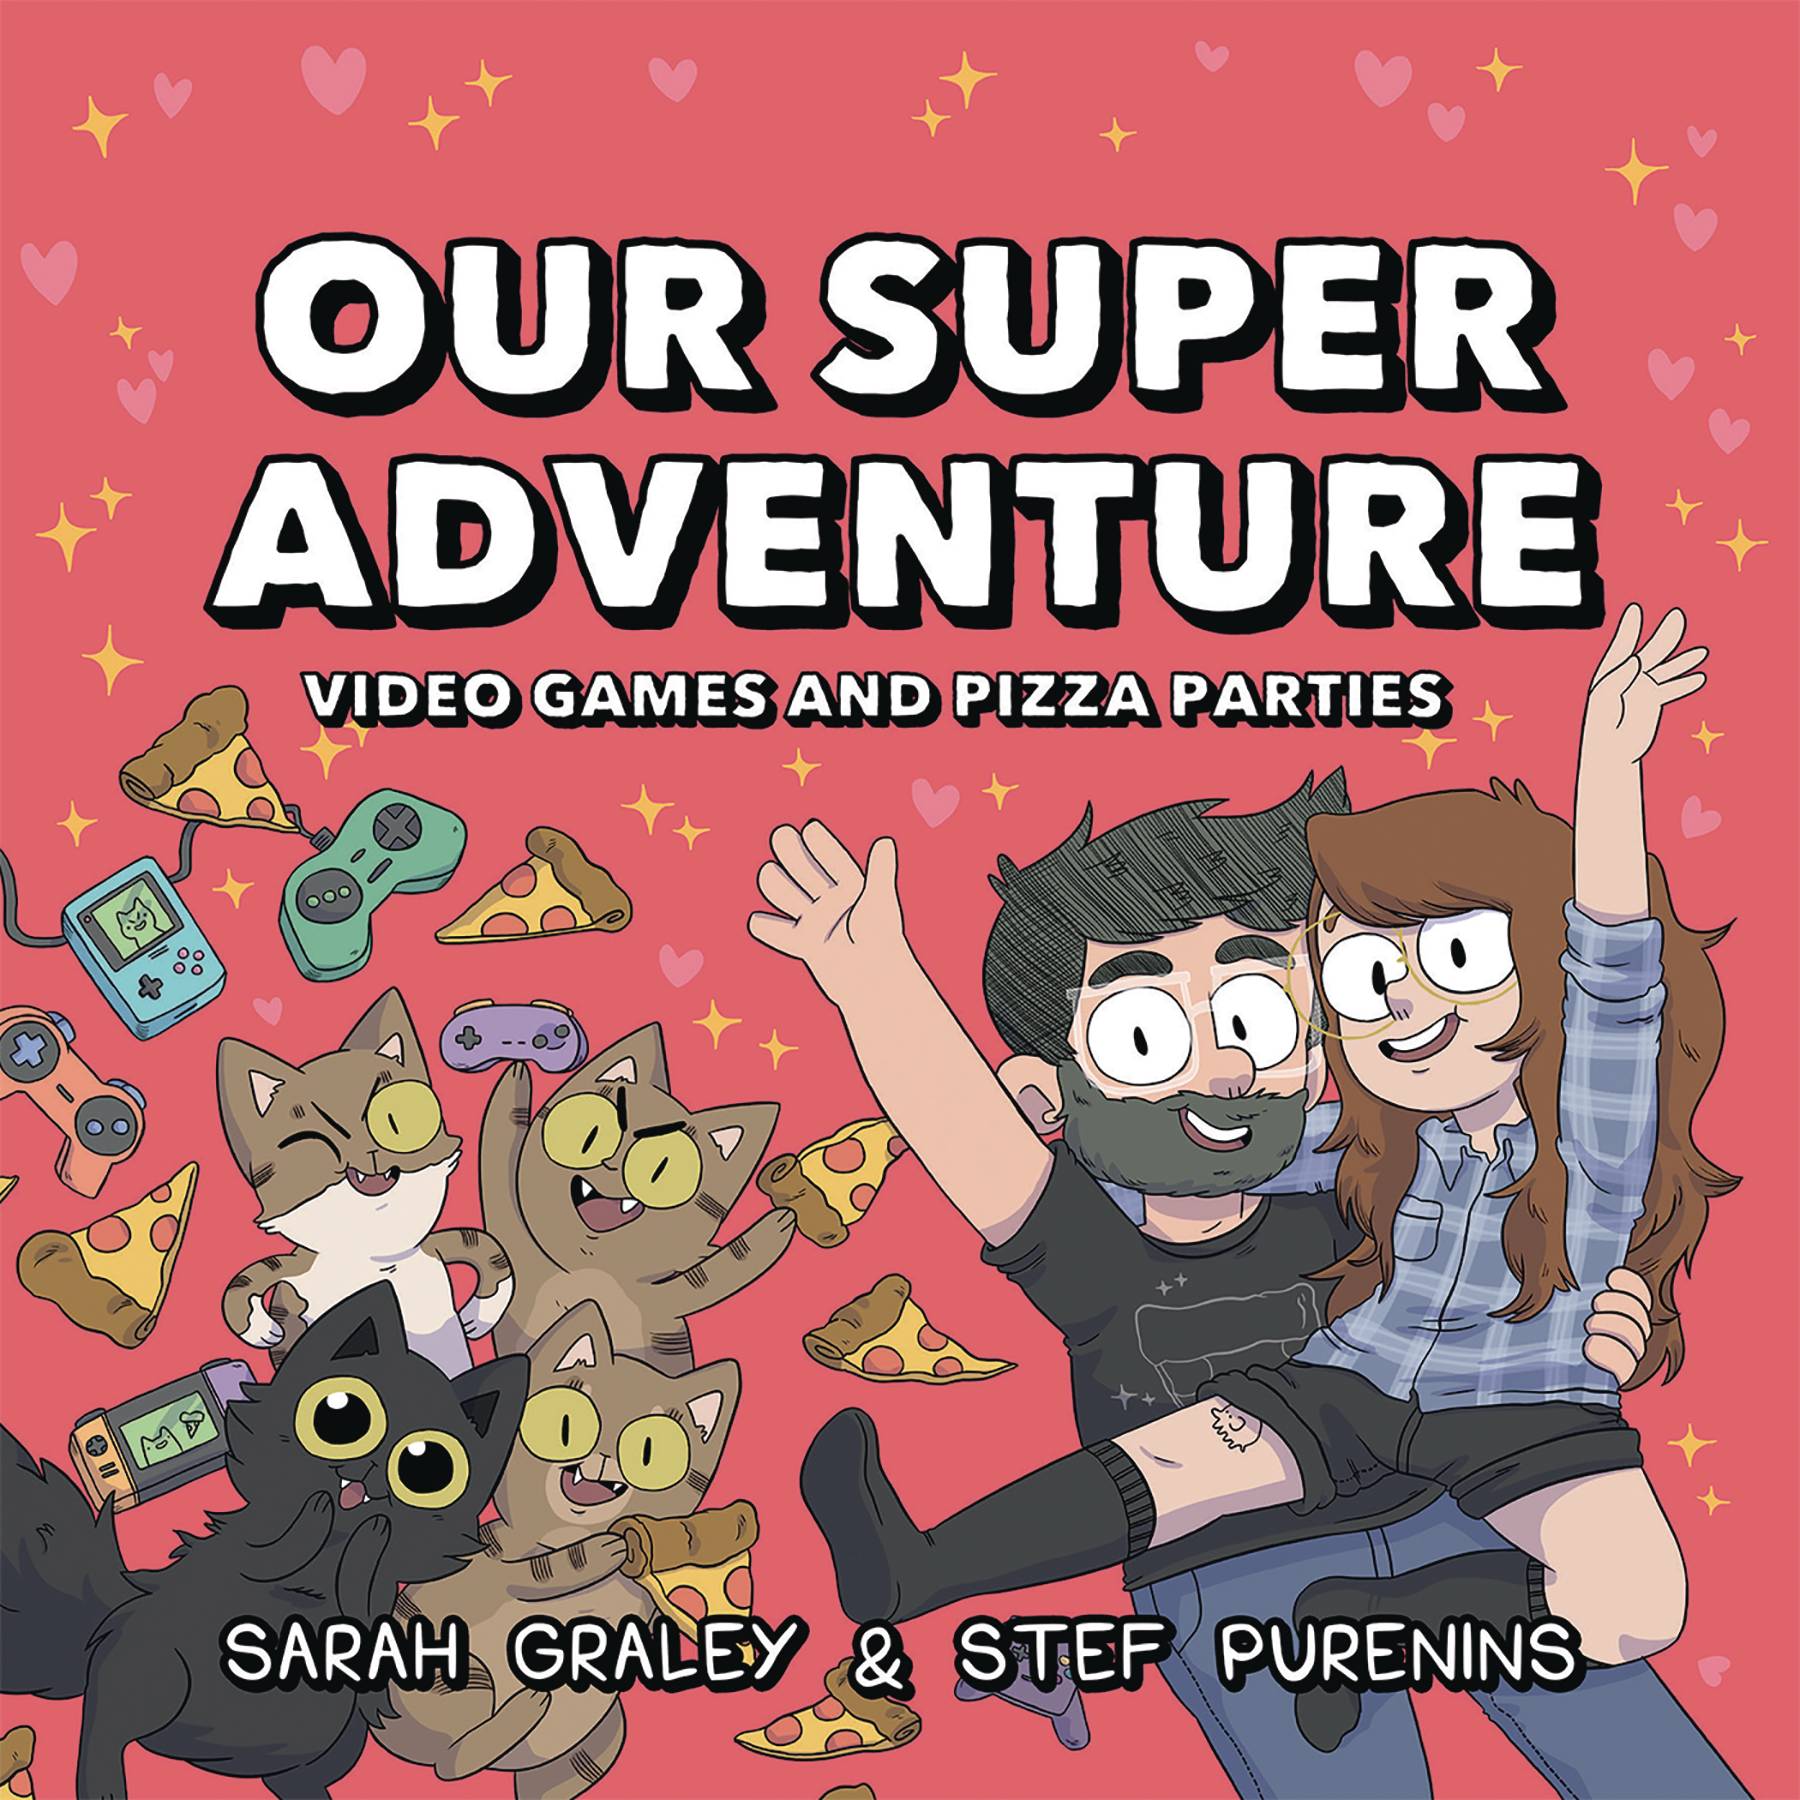 Our Super Adventure Hardcover Volume 2 Video Games & Pizza Parties